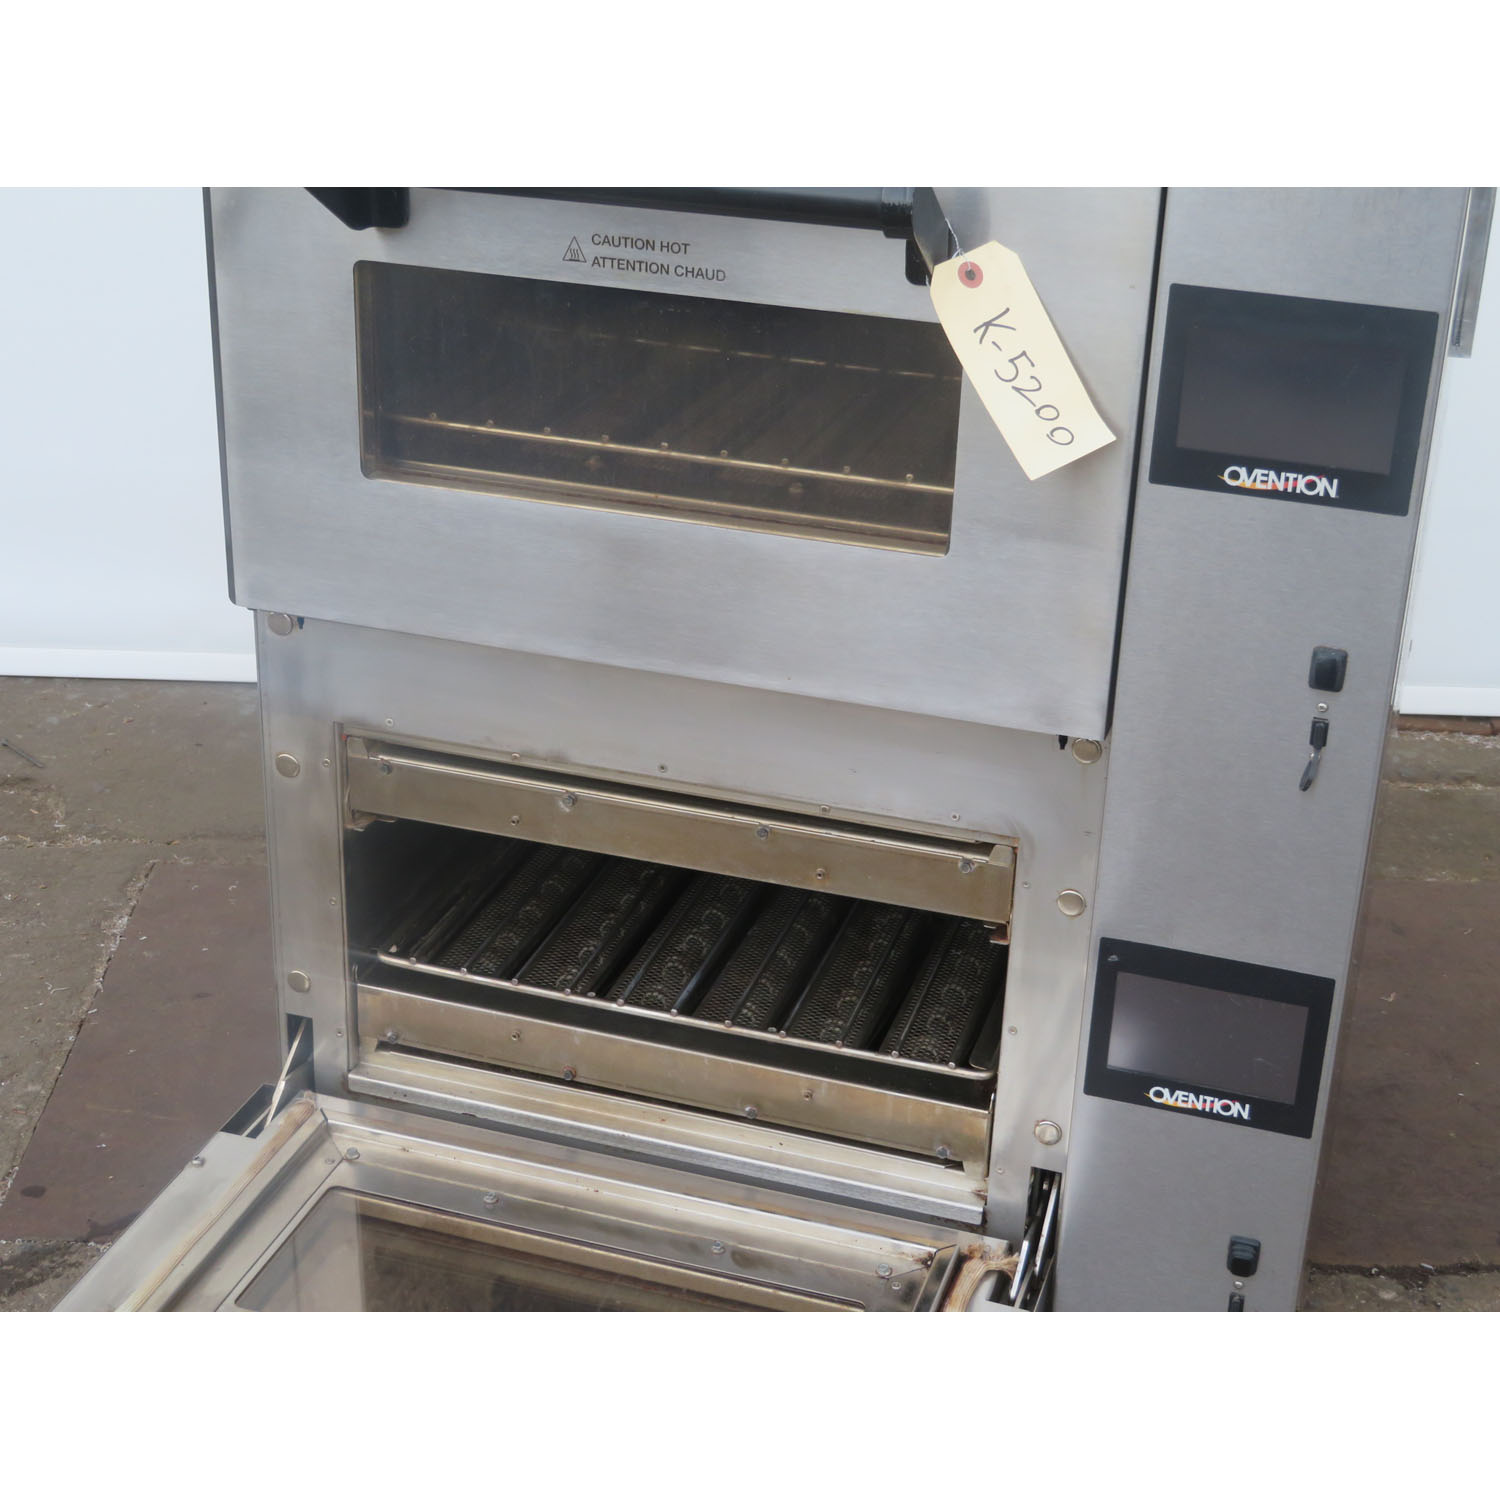 Ovention MILO2-16 Double Electric Oven, Used Great Condition image 2